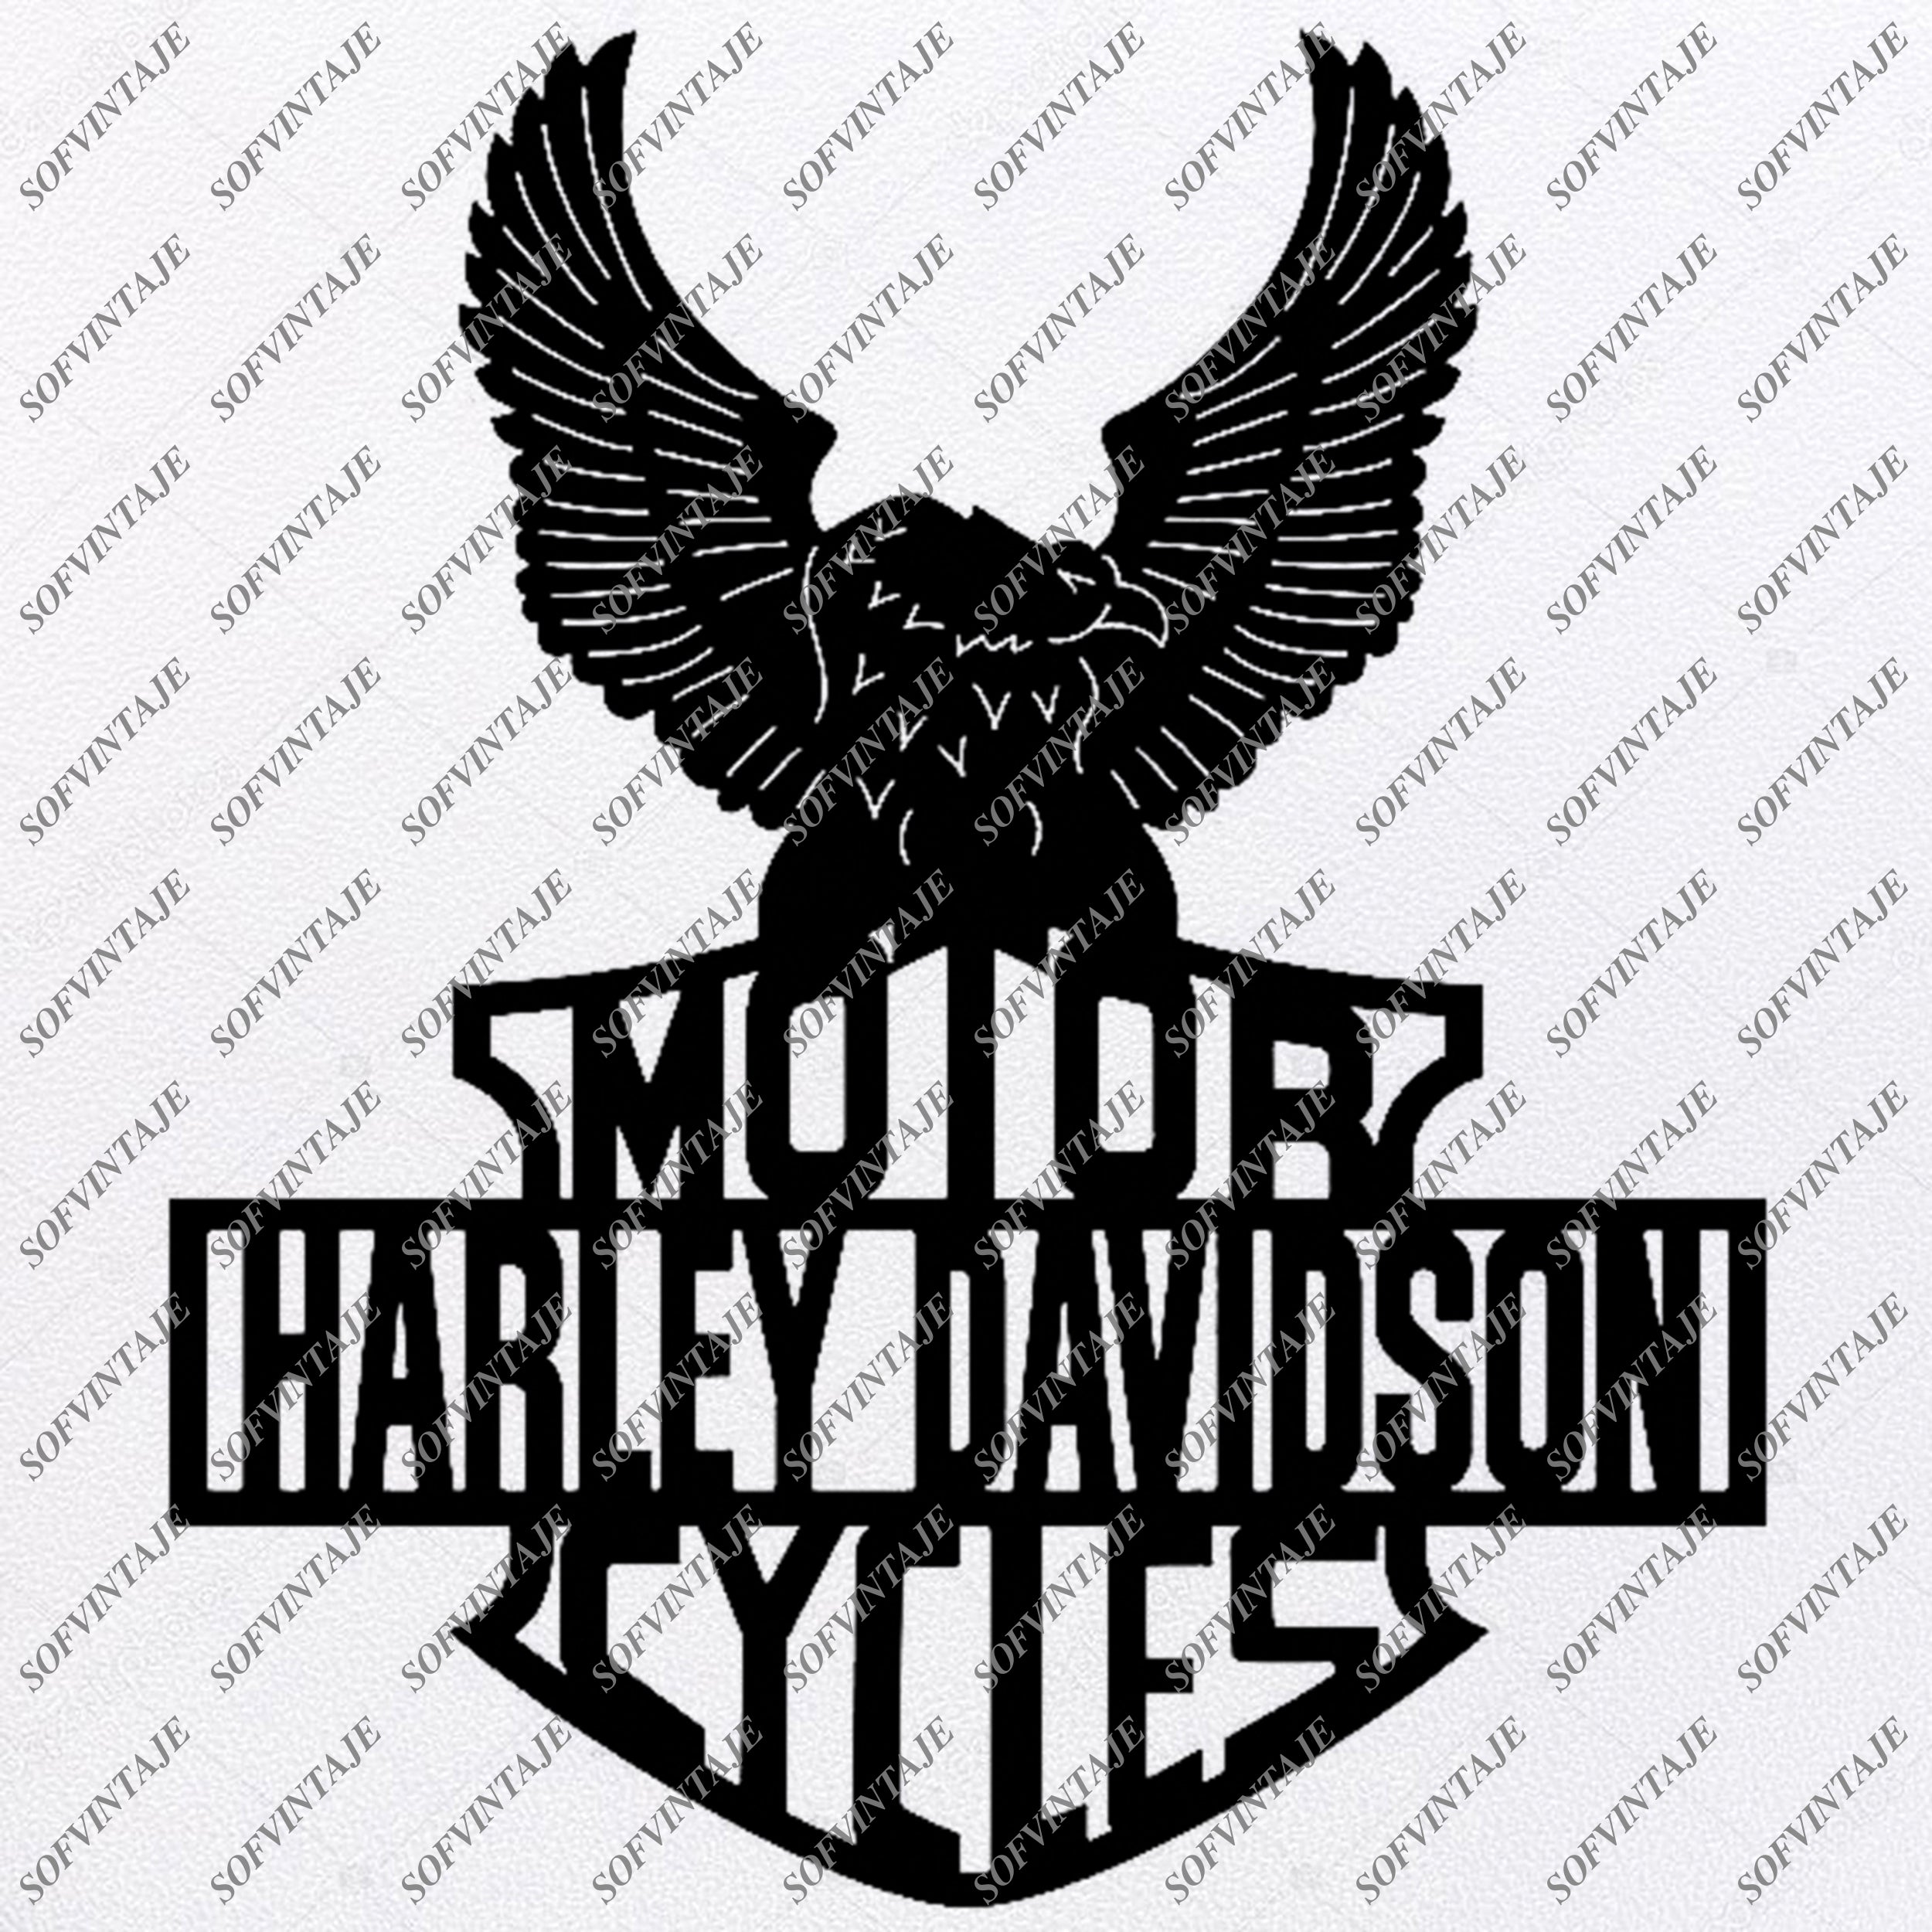 Download 25+ Free Harley Davidson Svg Files Pictures Free SVG files | Silhouette and Cricut Cutting Files